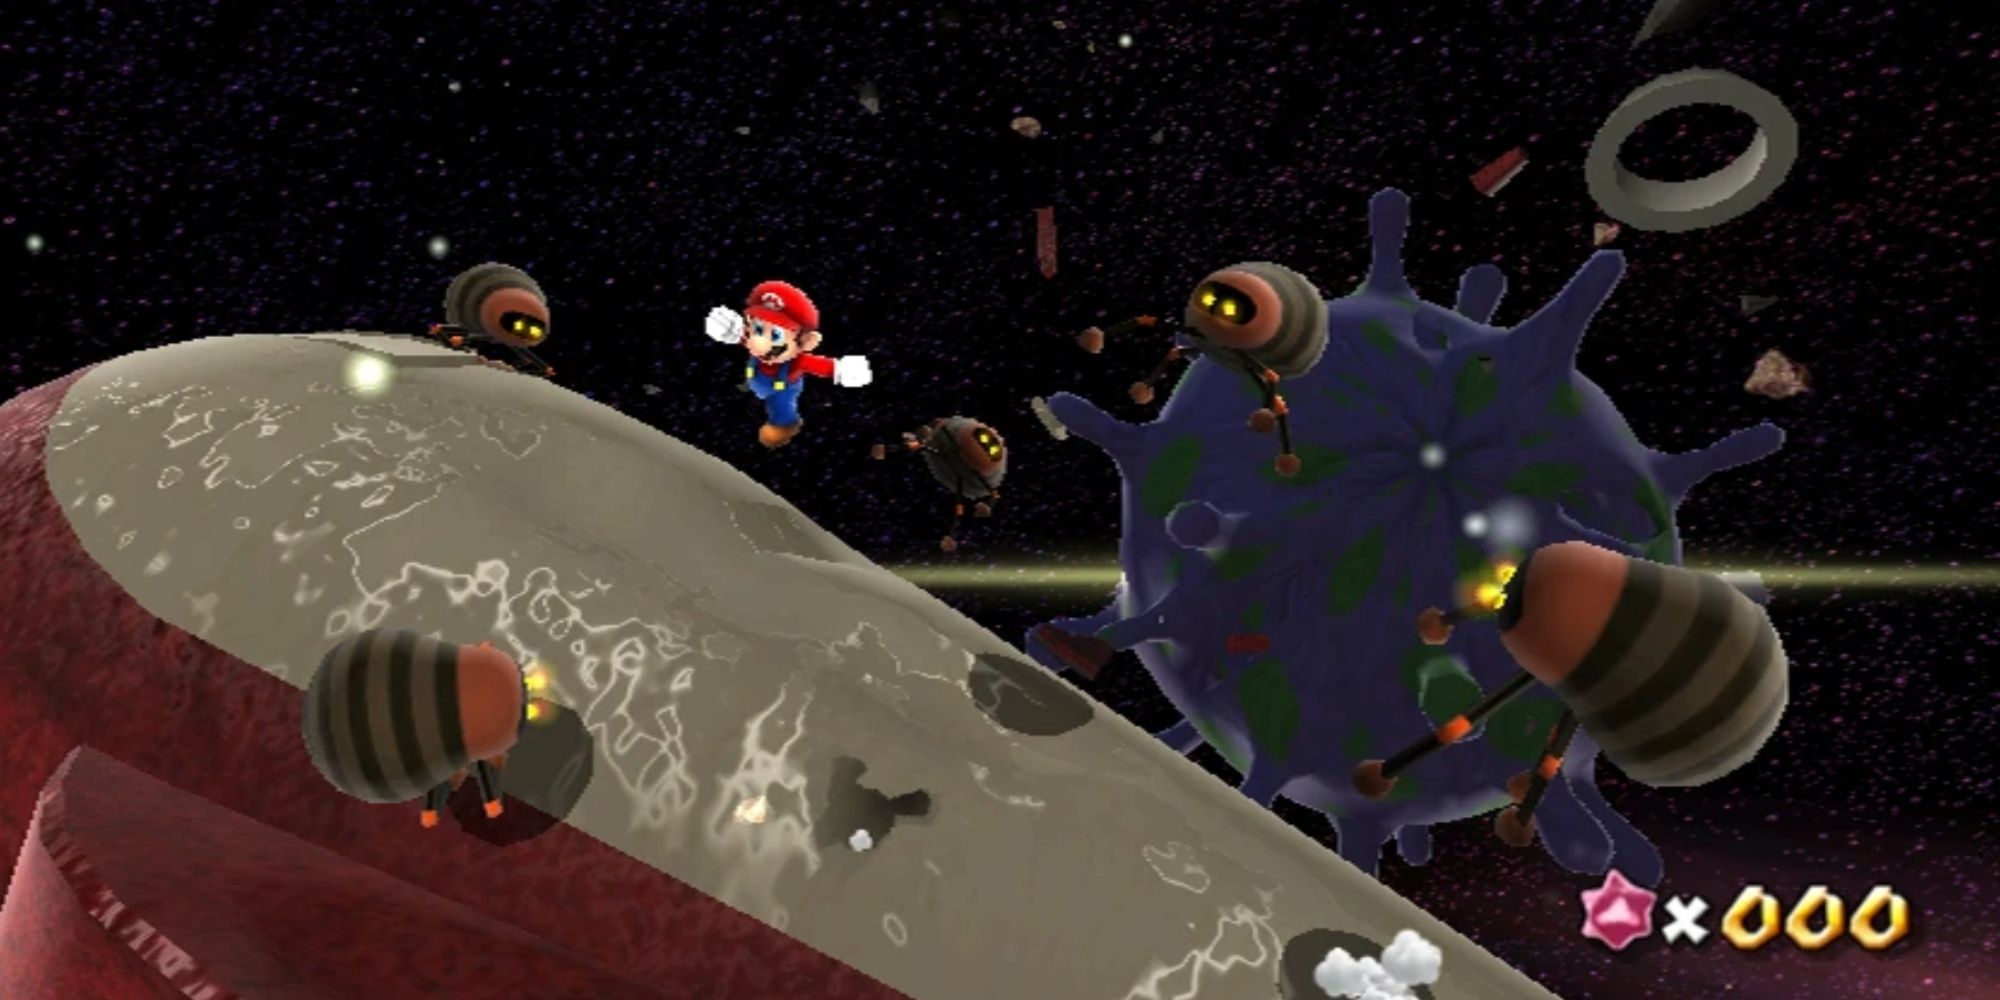 Mario Surrounded By A Group Of Spiderlike Enemies